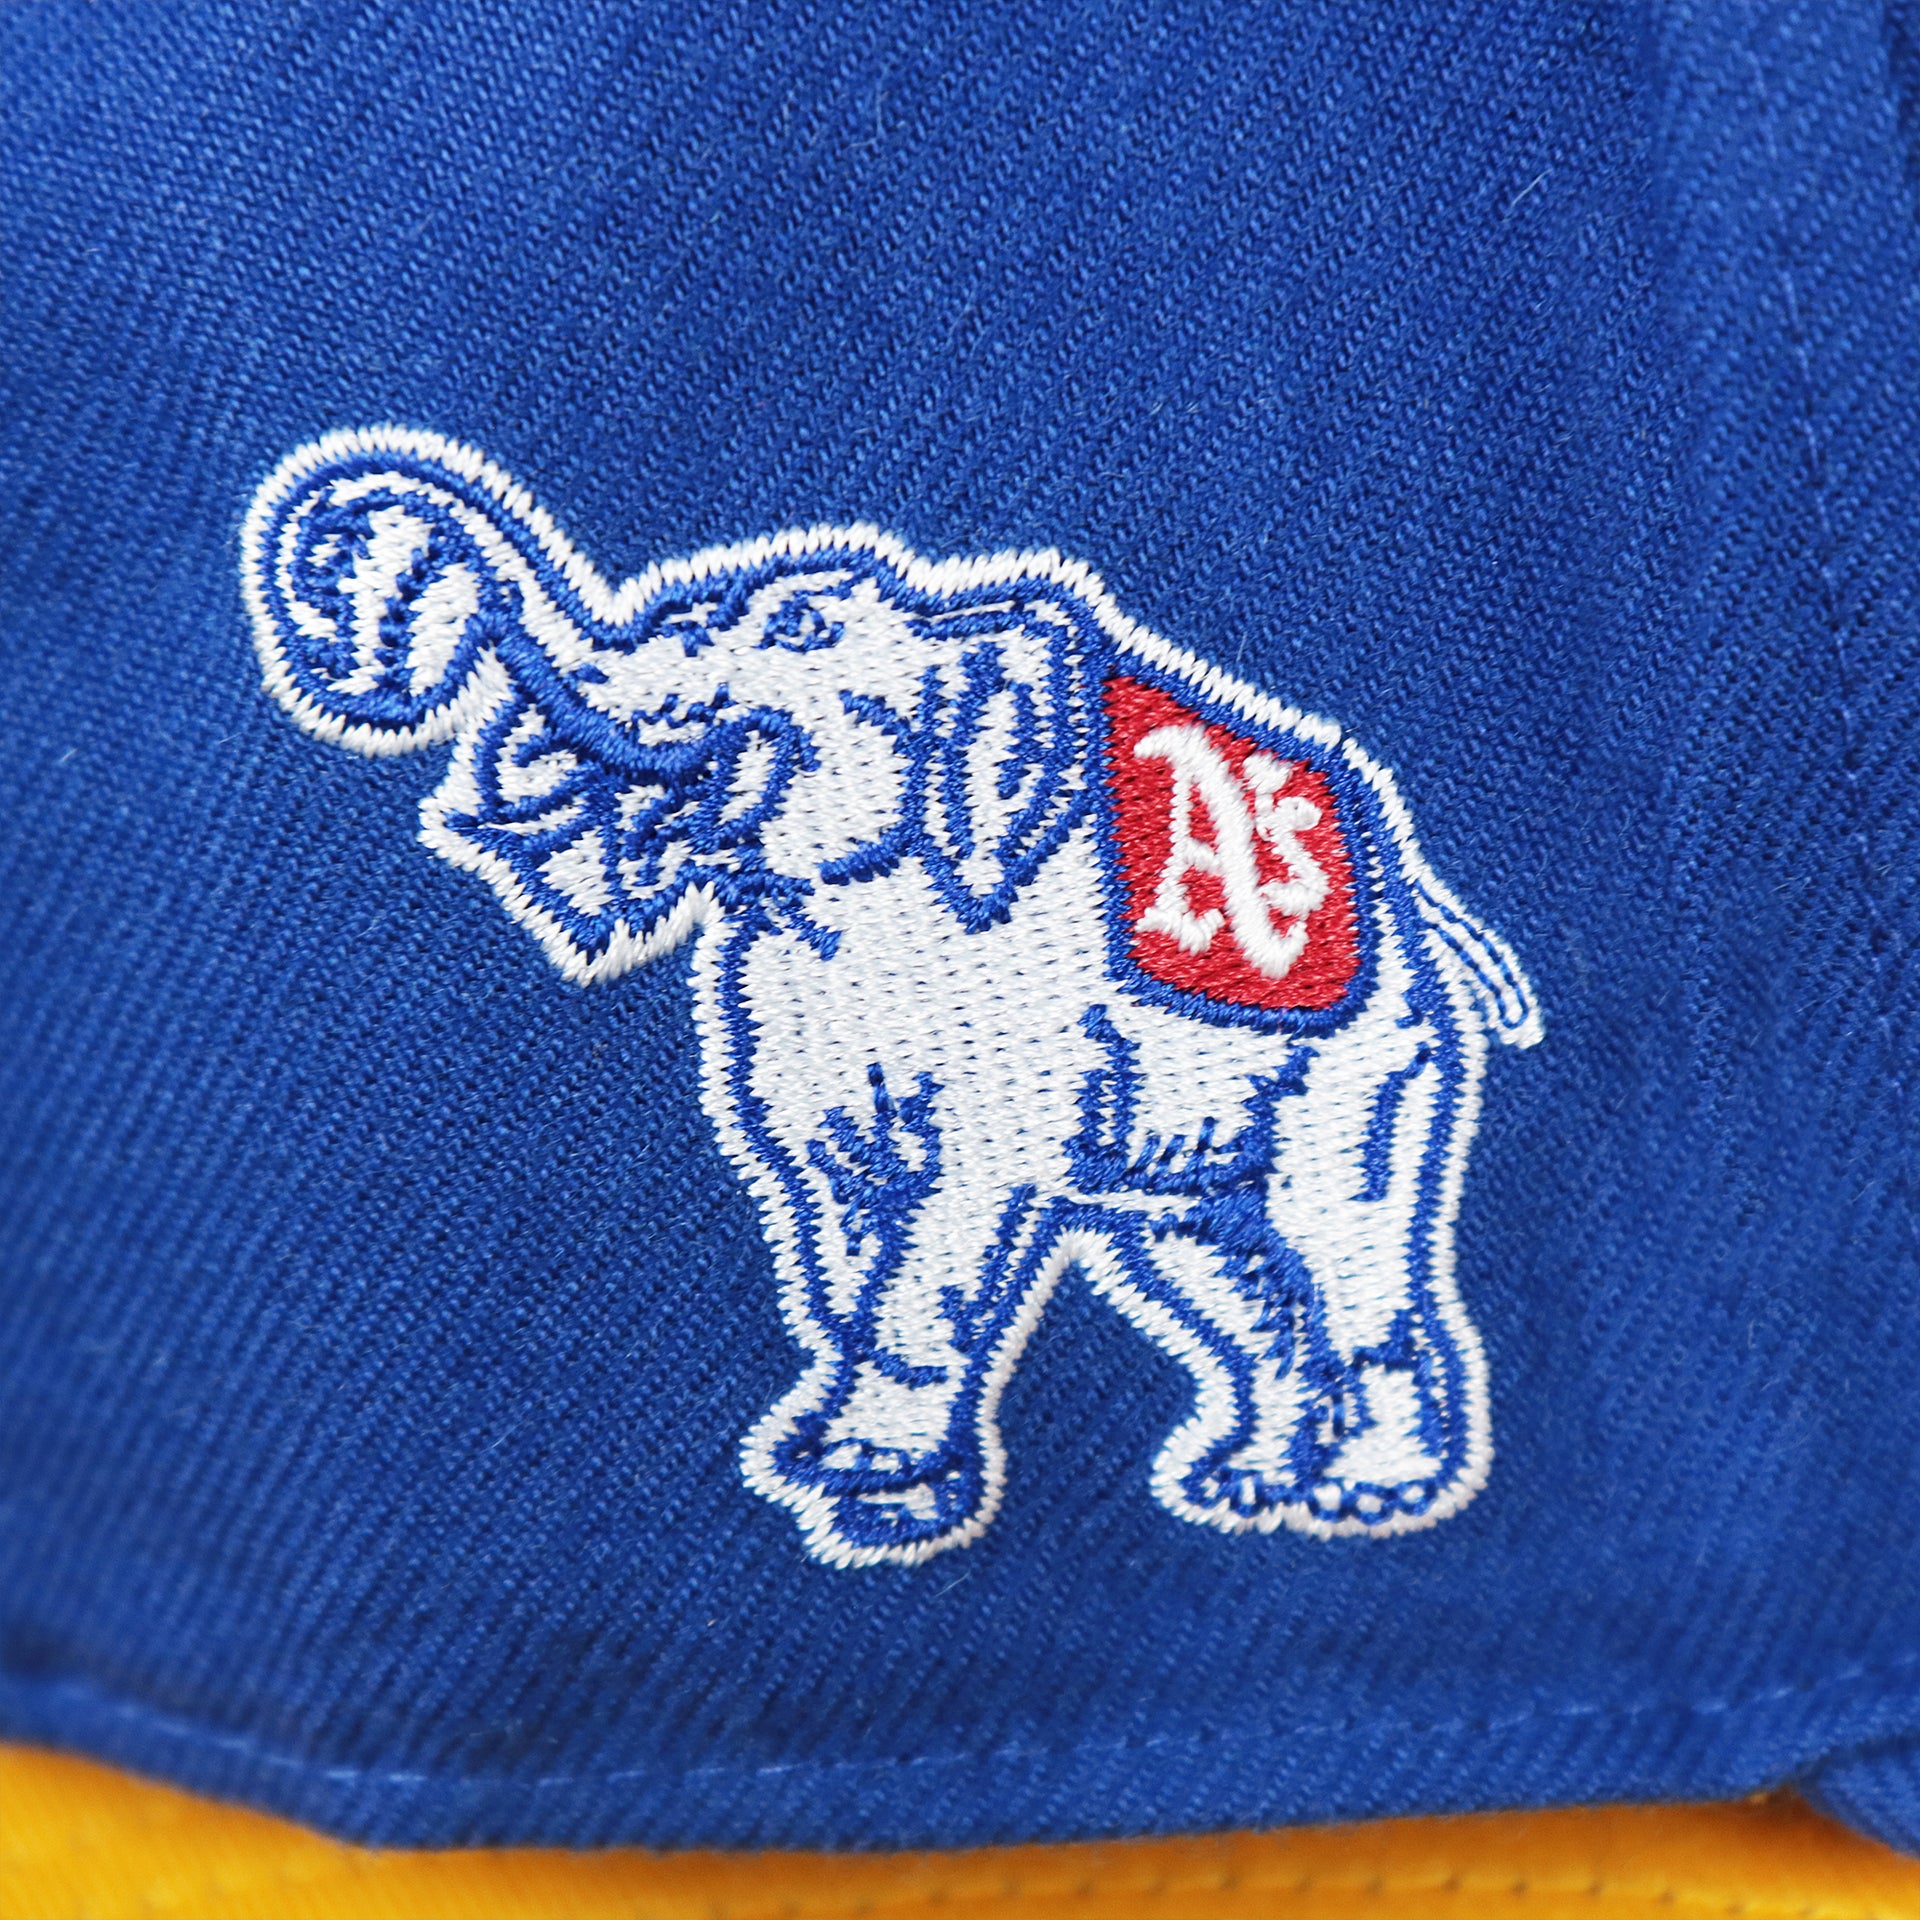 The Retro Athletics Logo on the Cooperstown Philadelphia Athletics Wordmark Retro Athletics Side Patch Snapback | Royal Blue Snapback